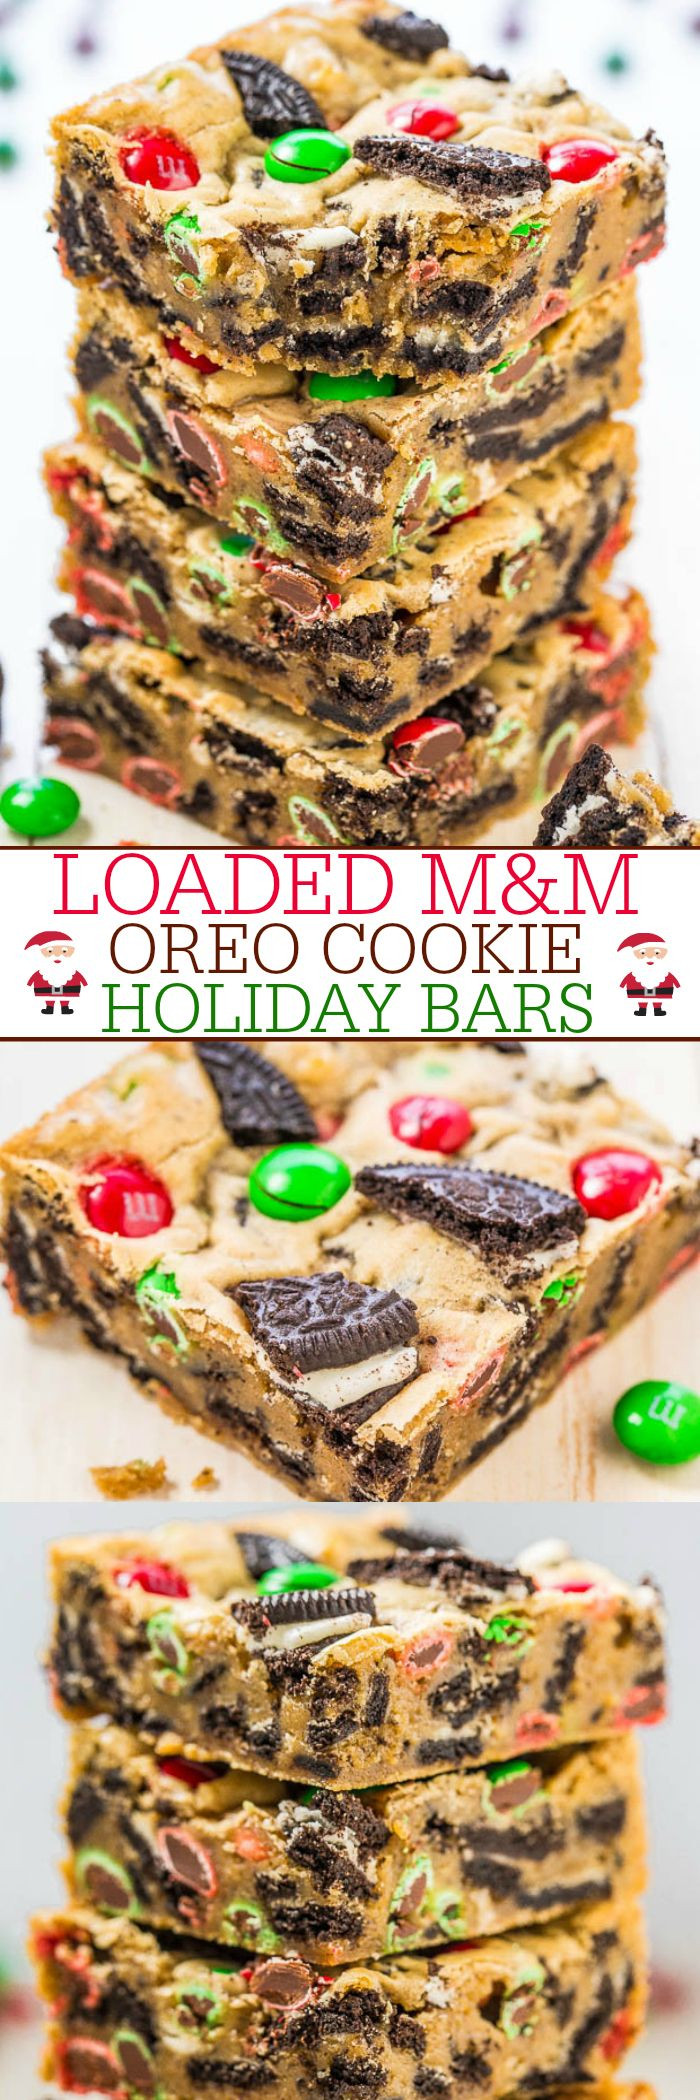 M&amp;M Christmas Cookies
 Loaded M&M Oreo Cookie Holiday Bars Recipe